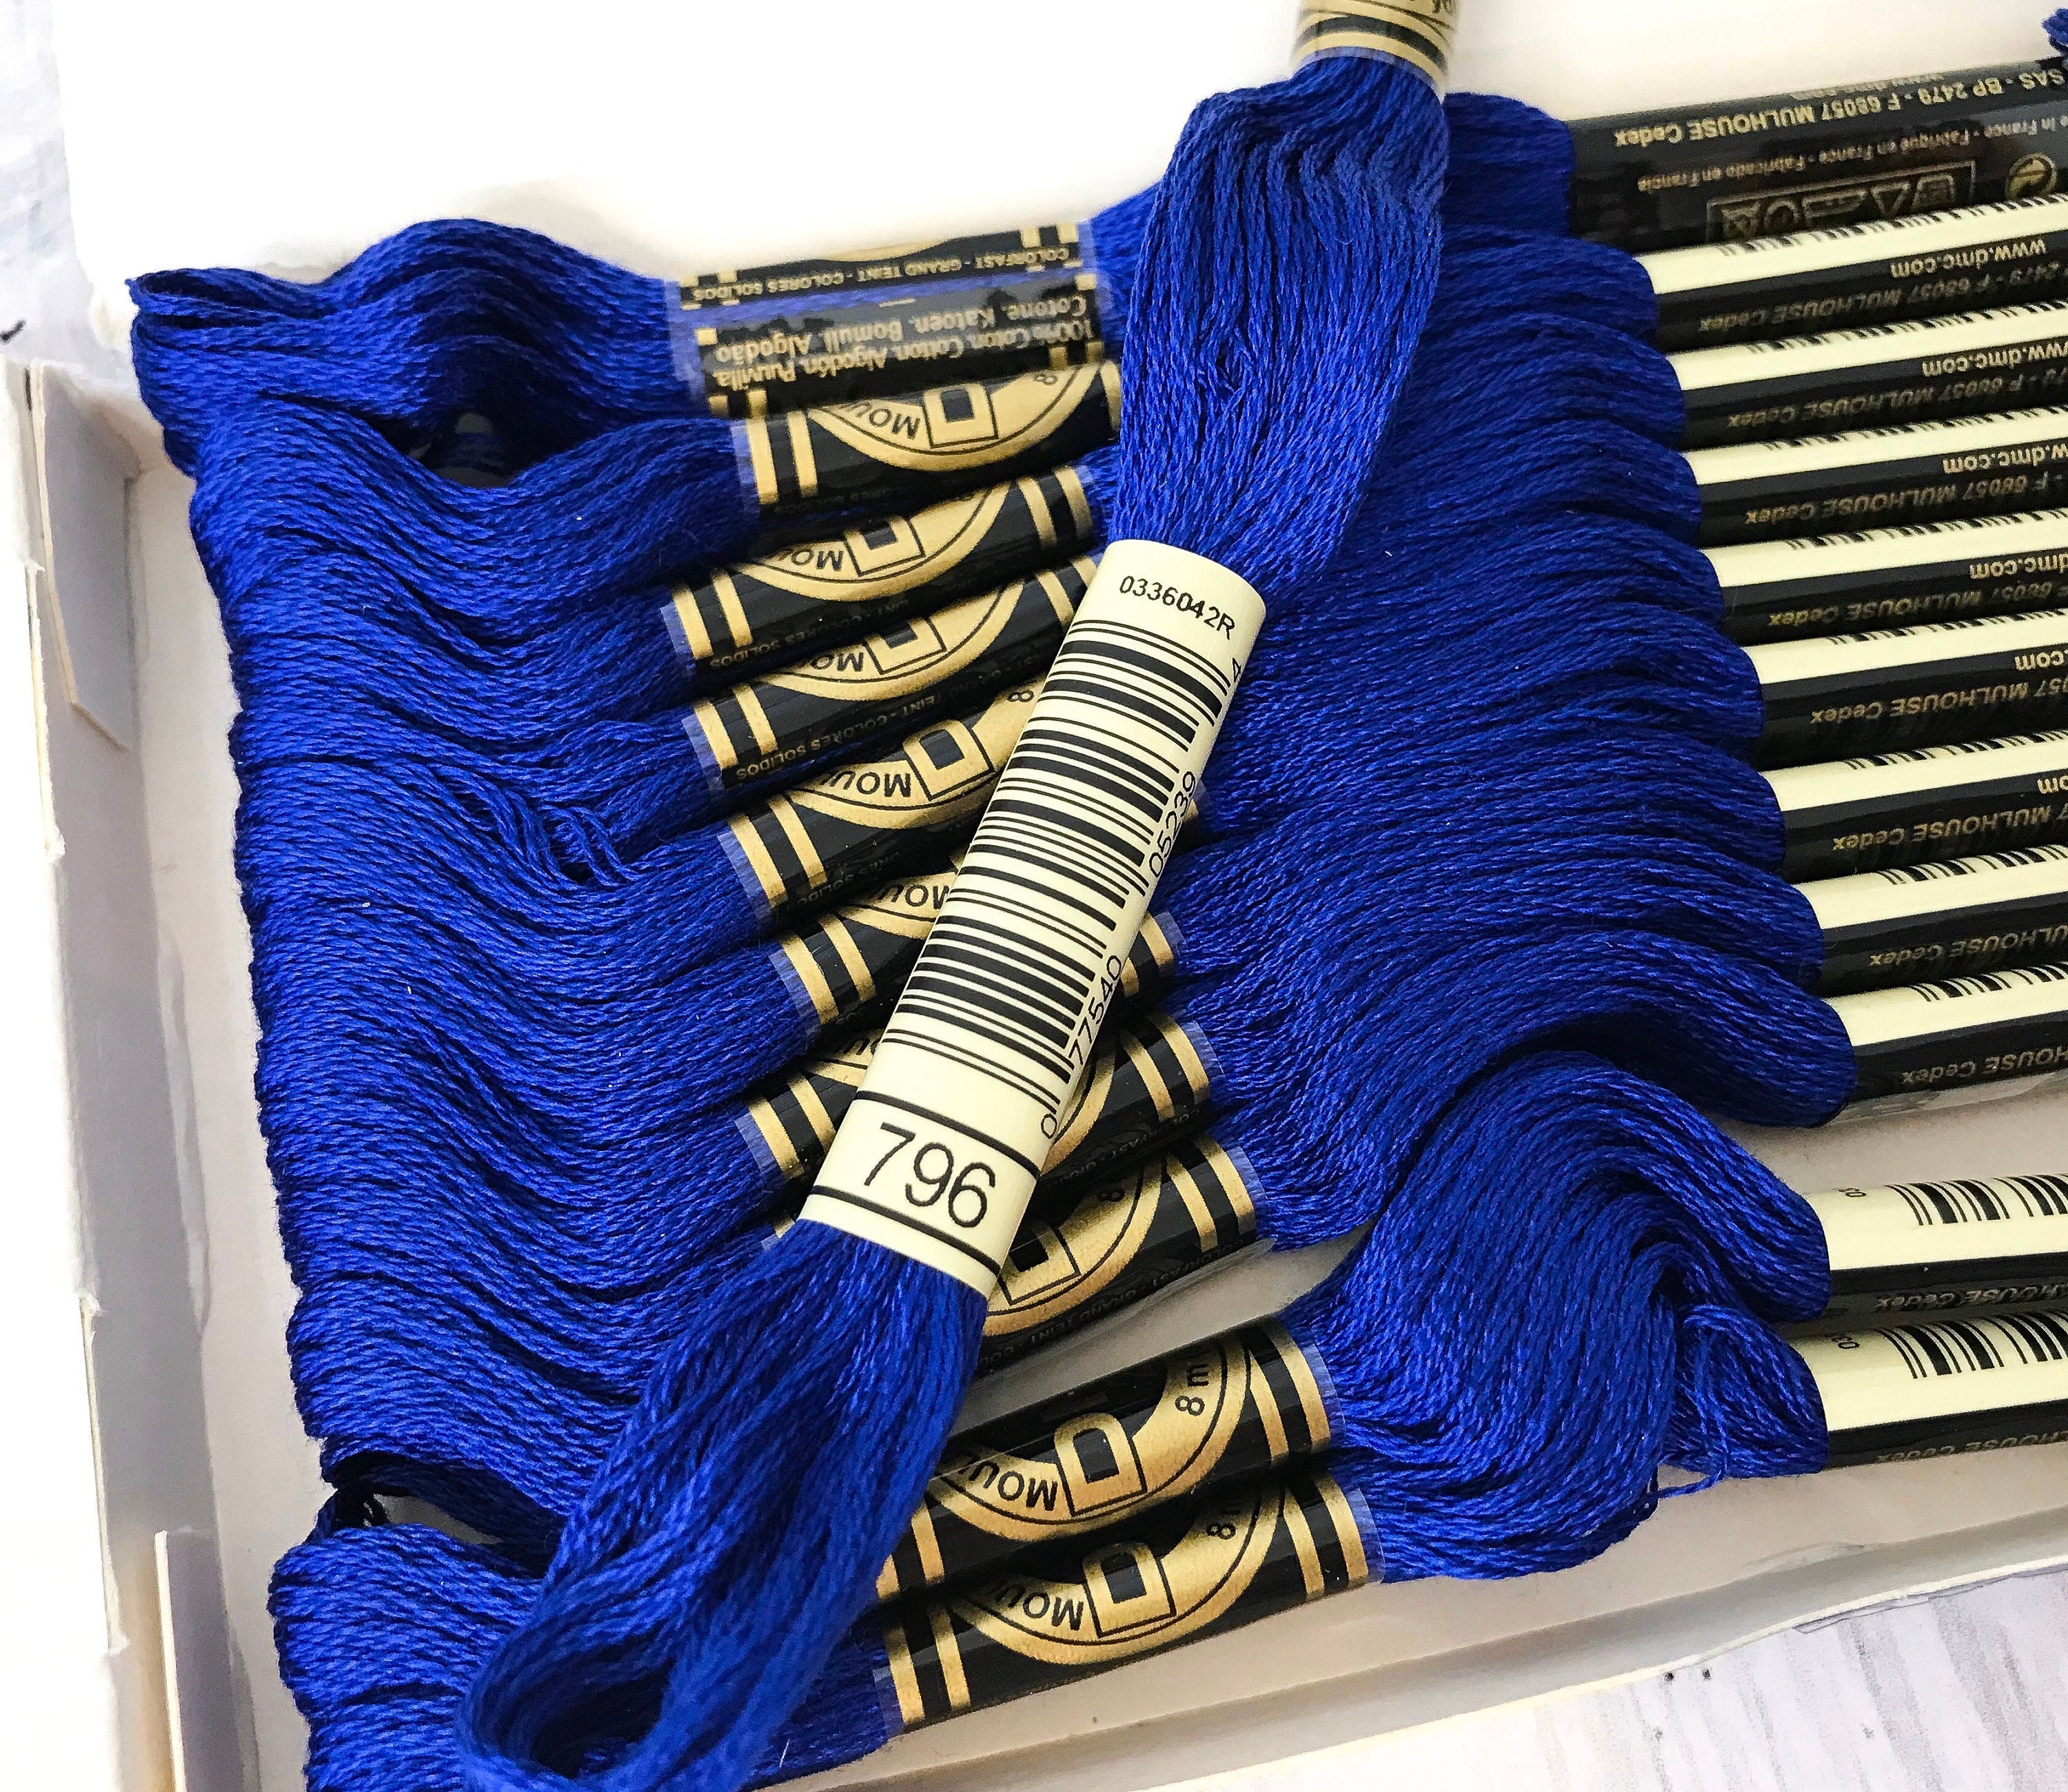 8m Darks Needlecrafters Cotton Embroidery Floss